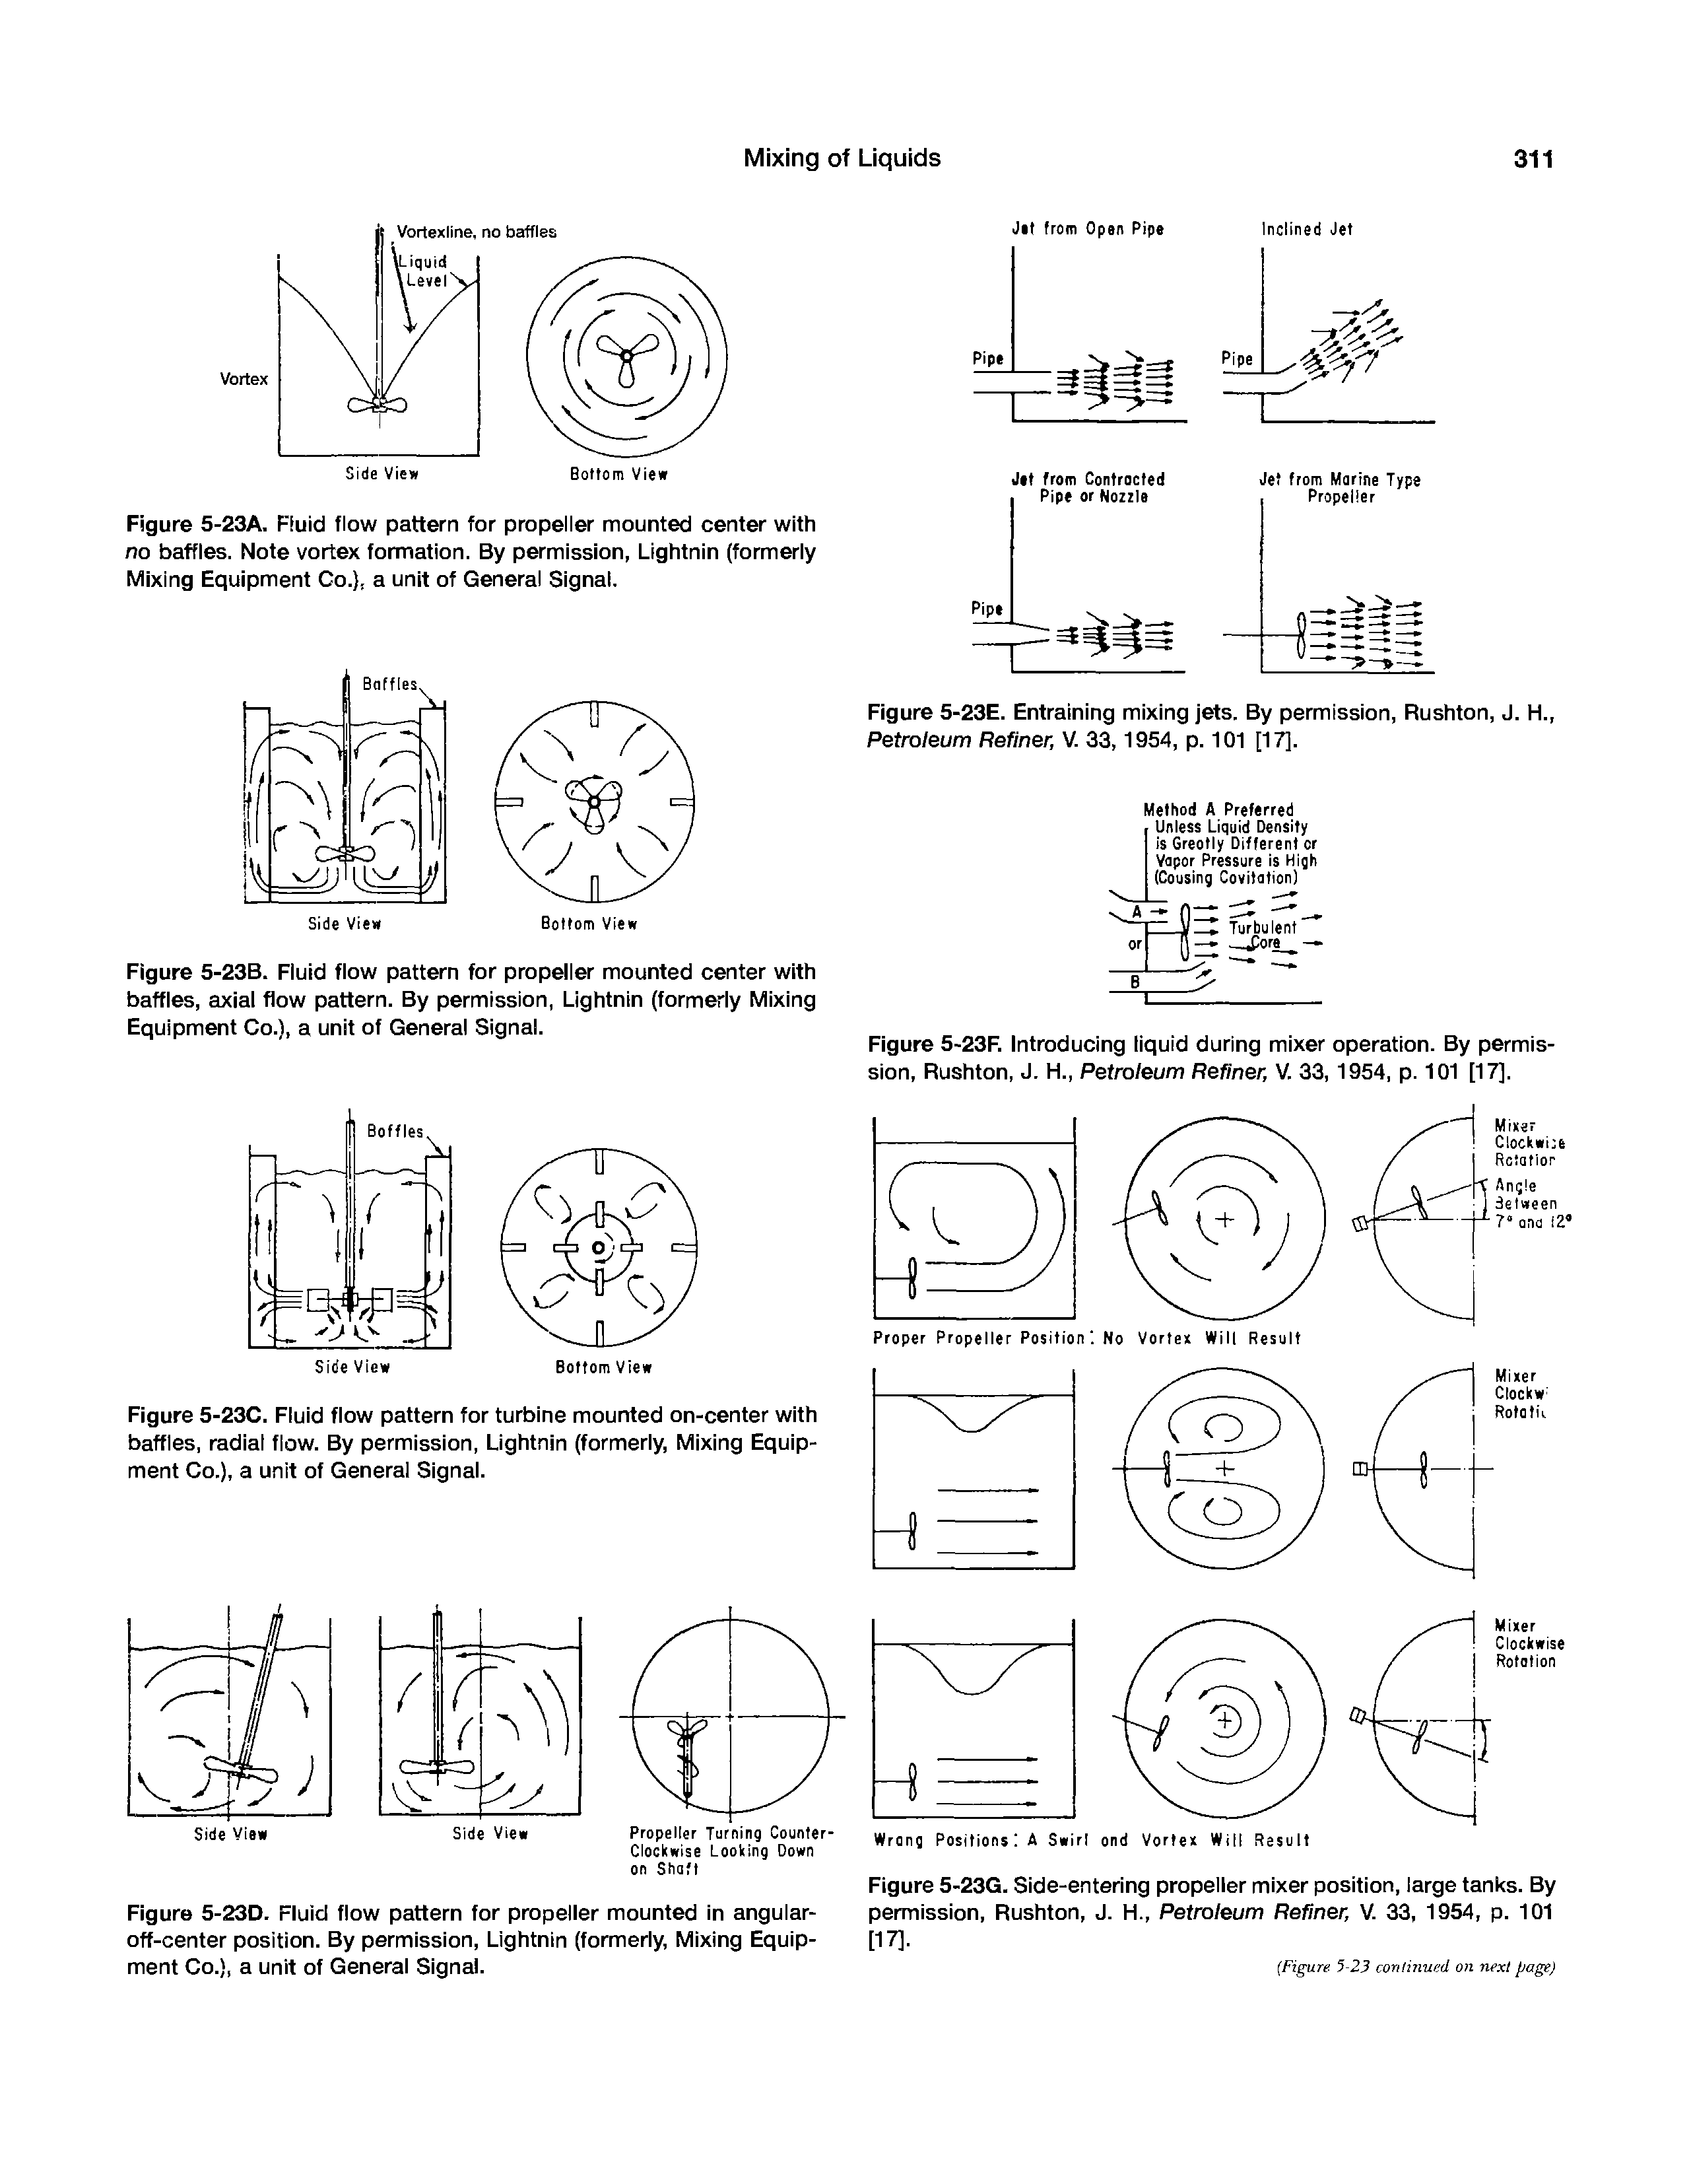 Figure 5-23A. Ruid flow pattern for propeller mounted center with no baffles. Note vortex formation. By permission, LIghtnin (formerly Mixing Equipment Co.), a unit of General Signal.